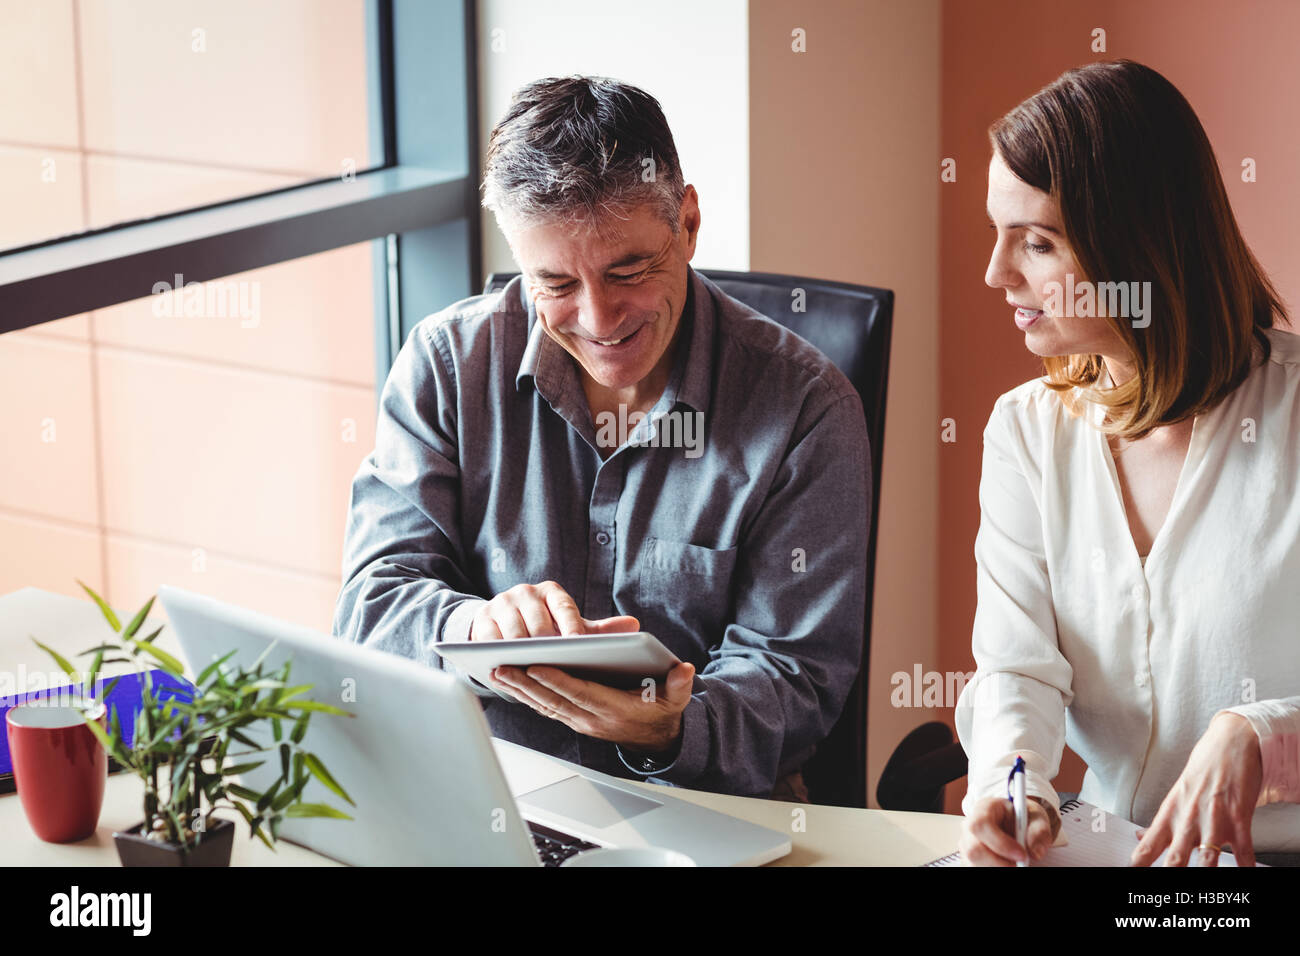 Man and woman discussing over digital tablet Stock Photo